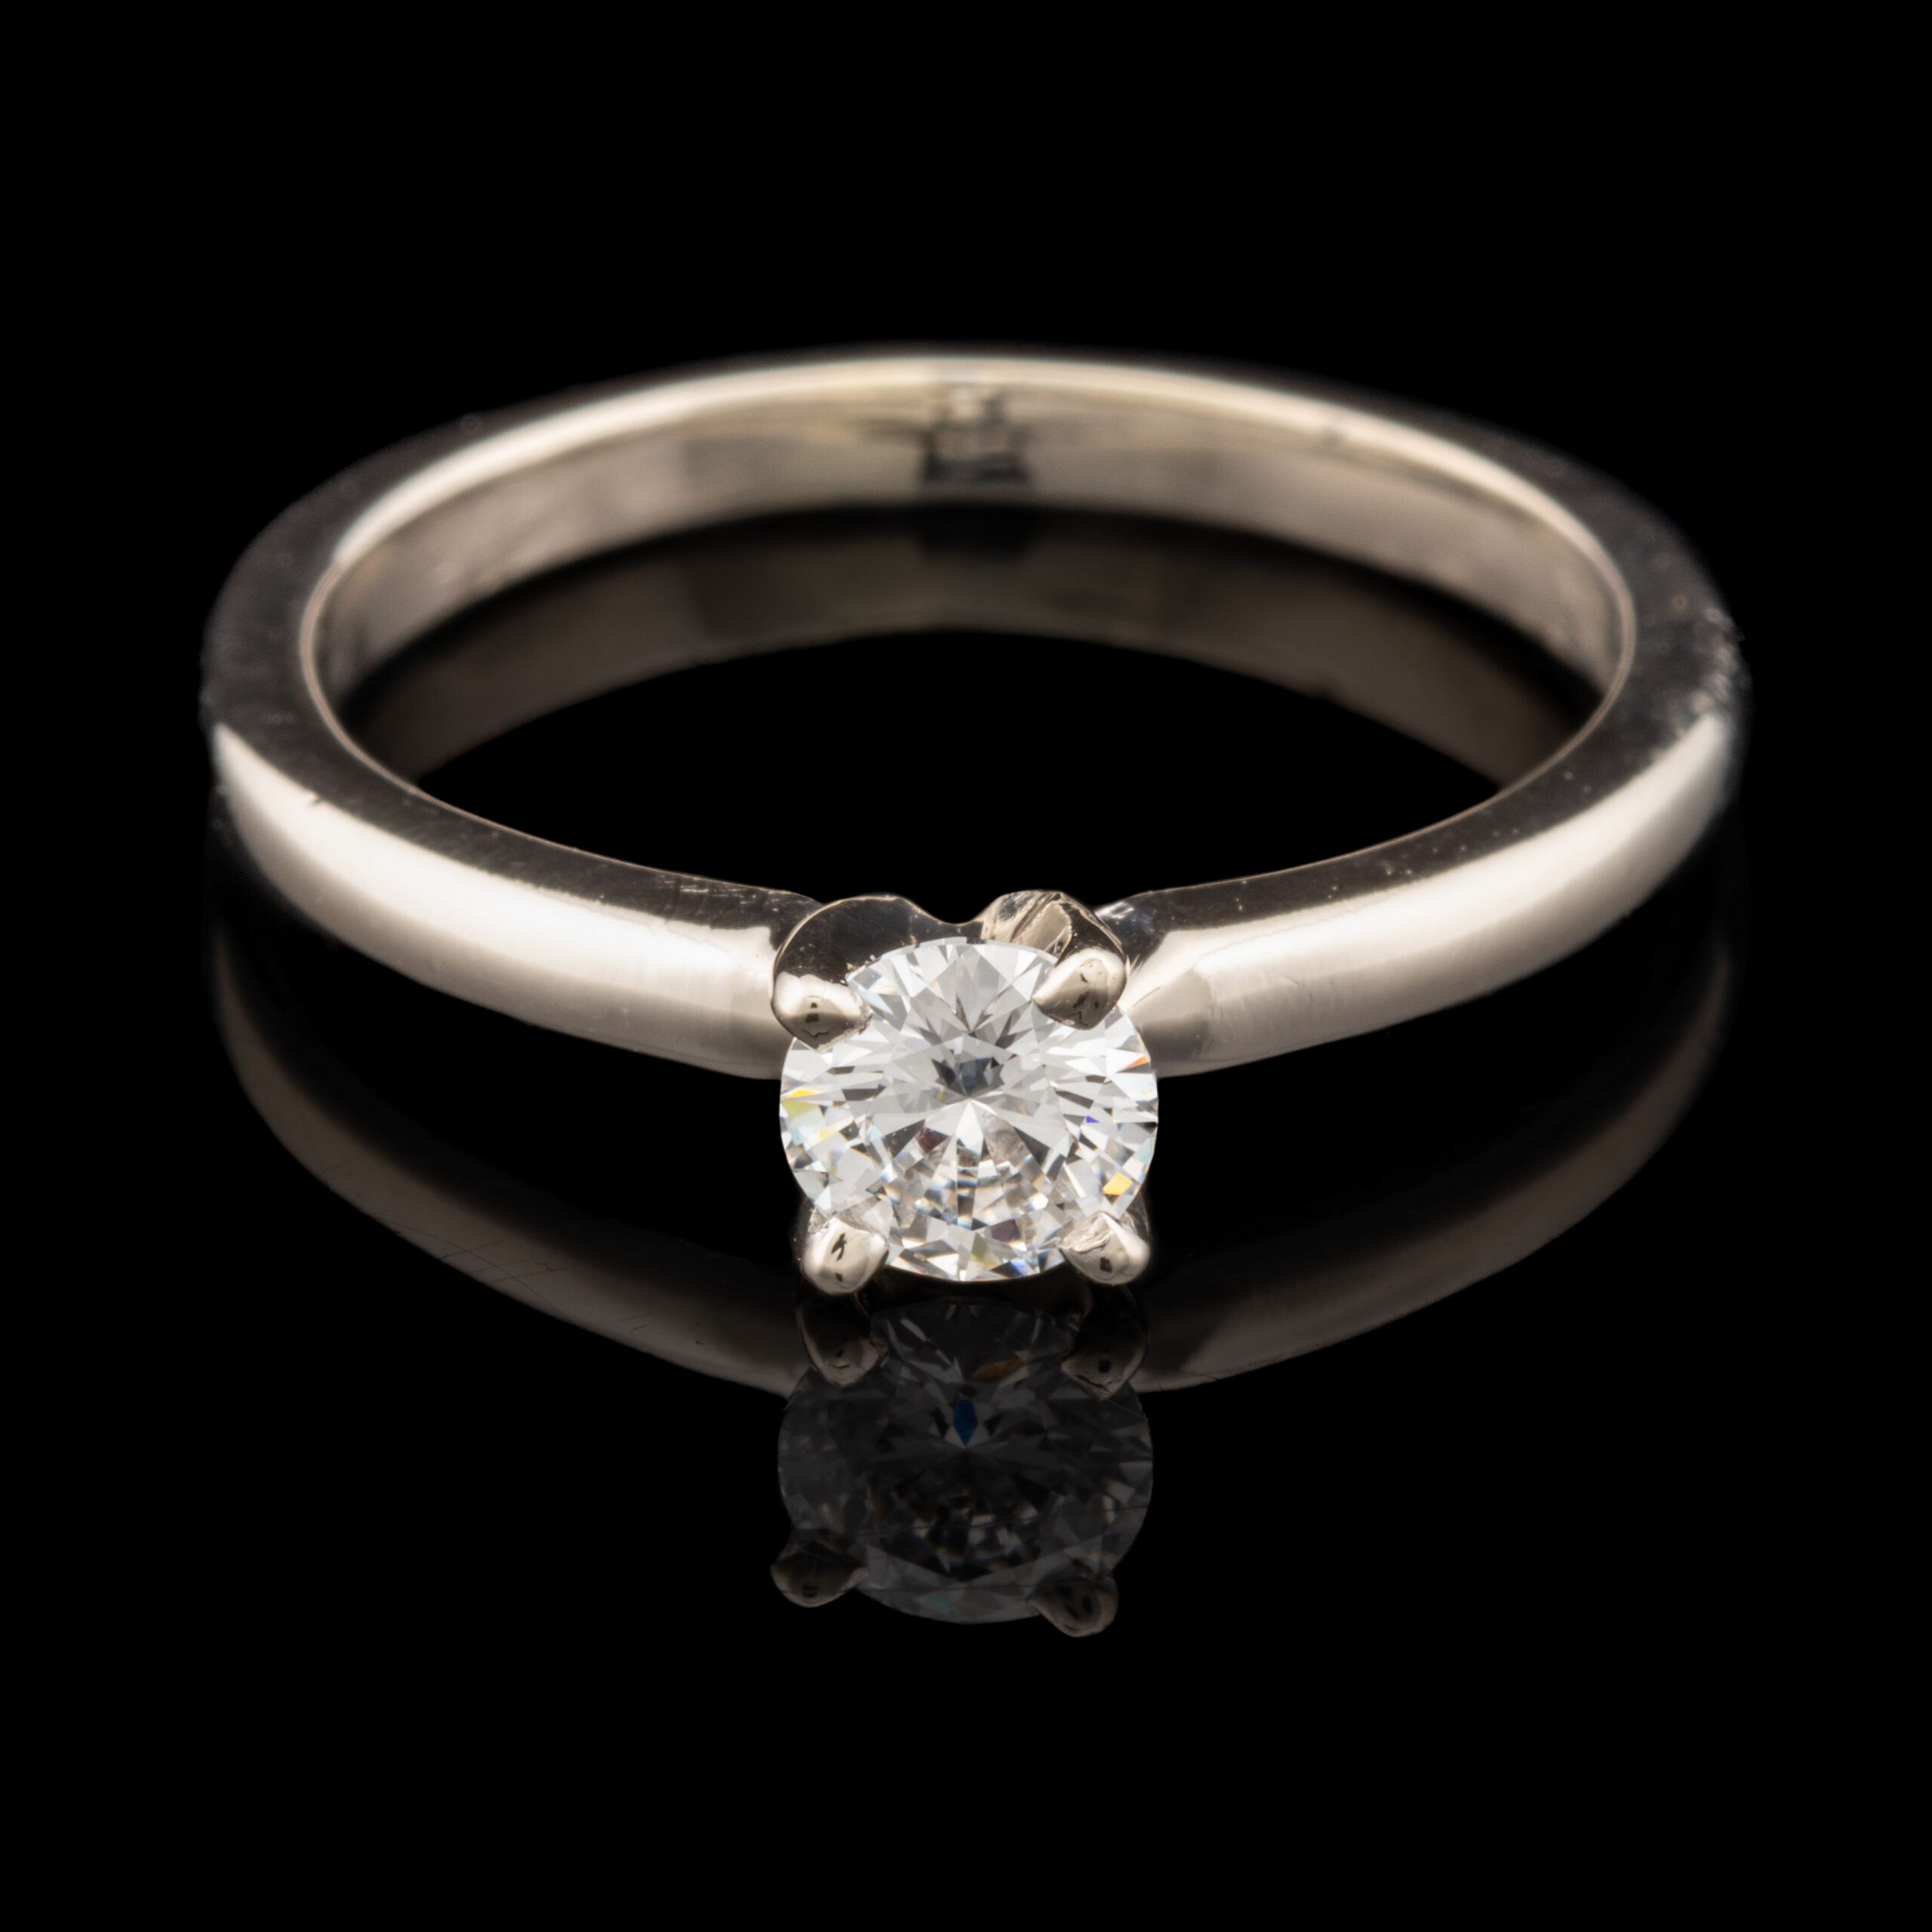 Pre-Owned VS2 Diamond Solitaire Engagement Ring in 14K